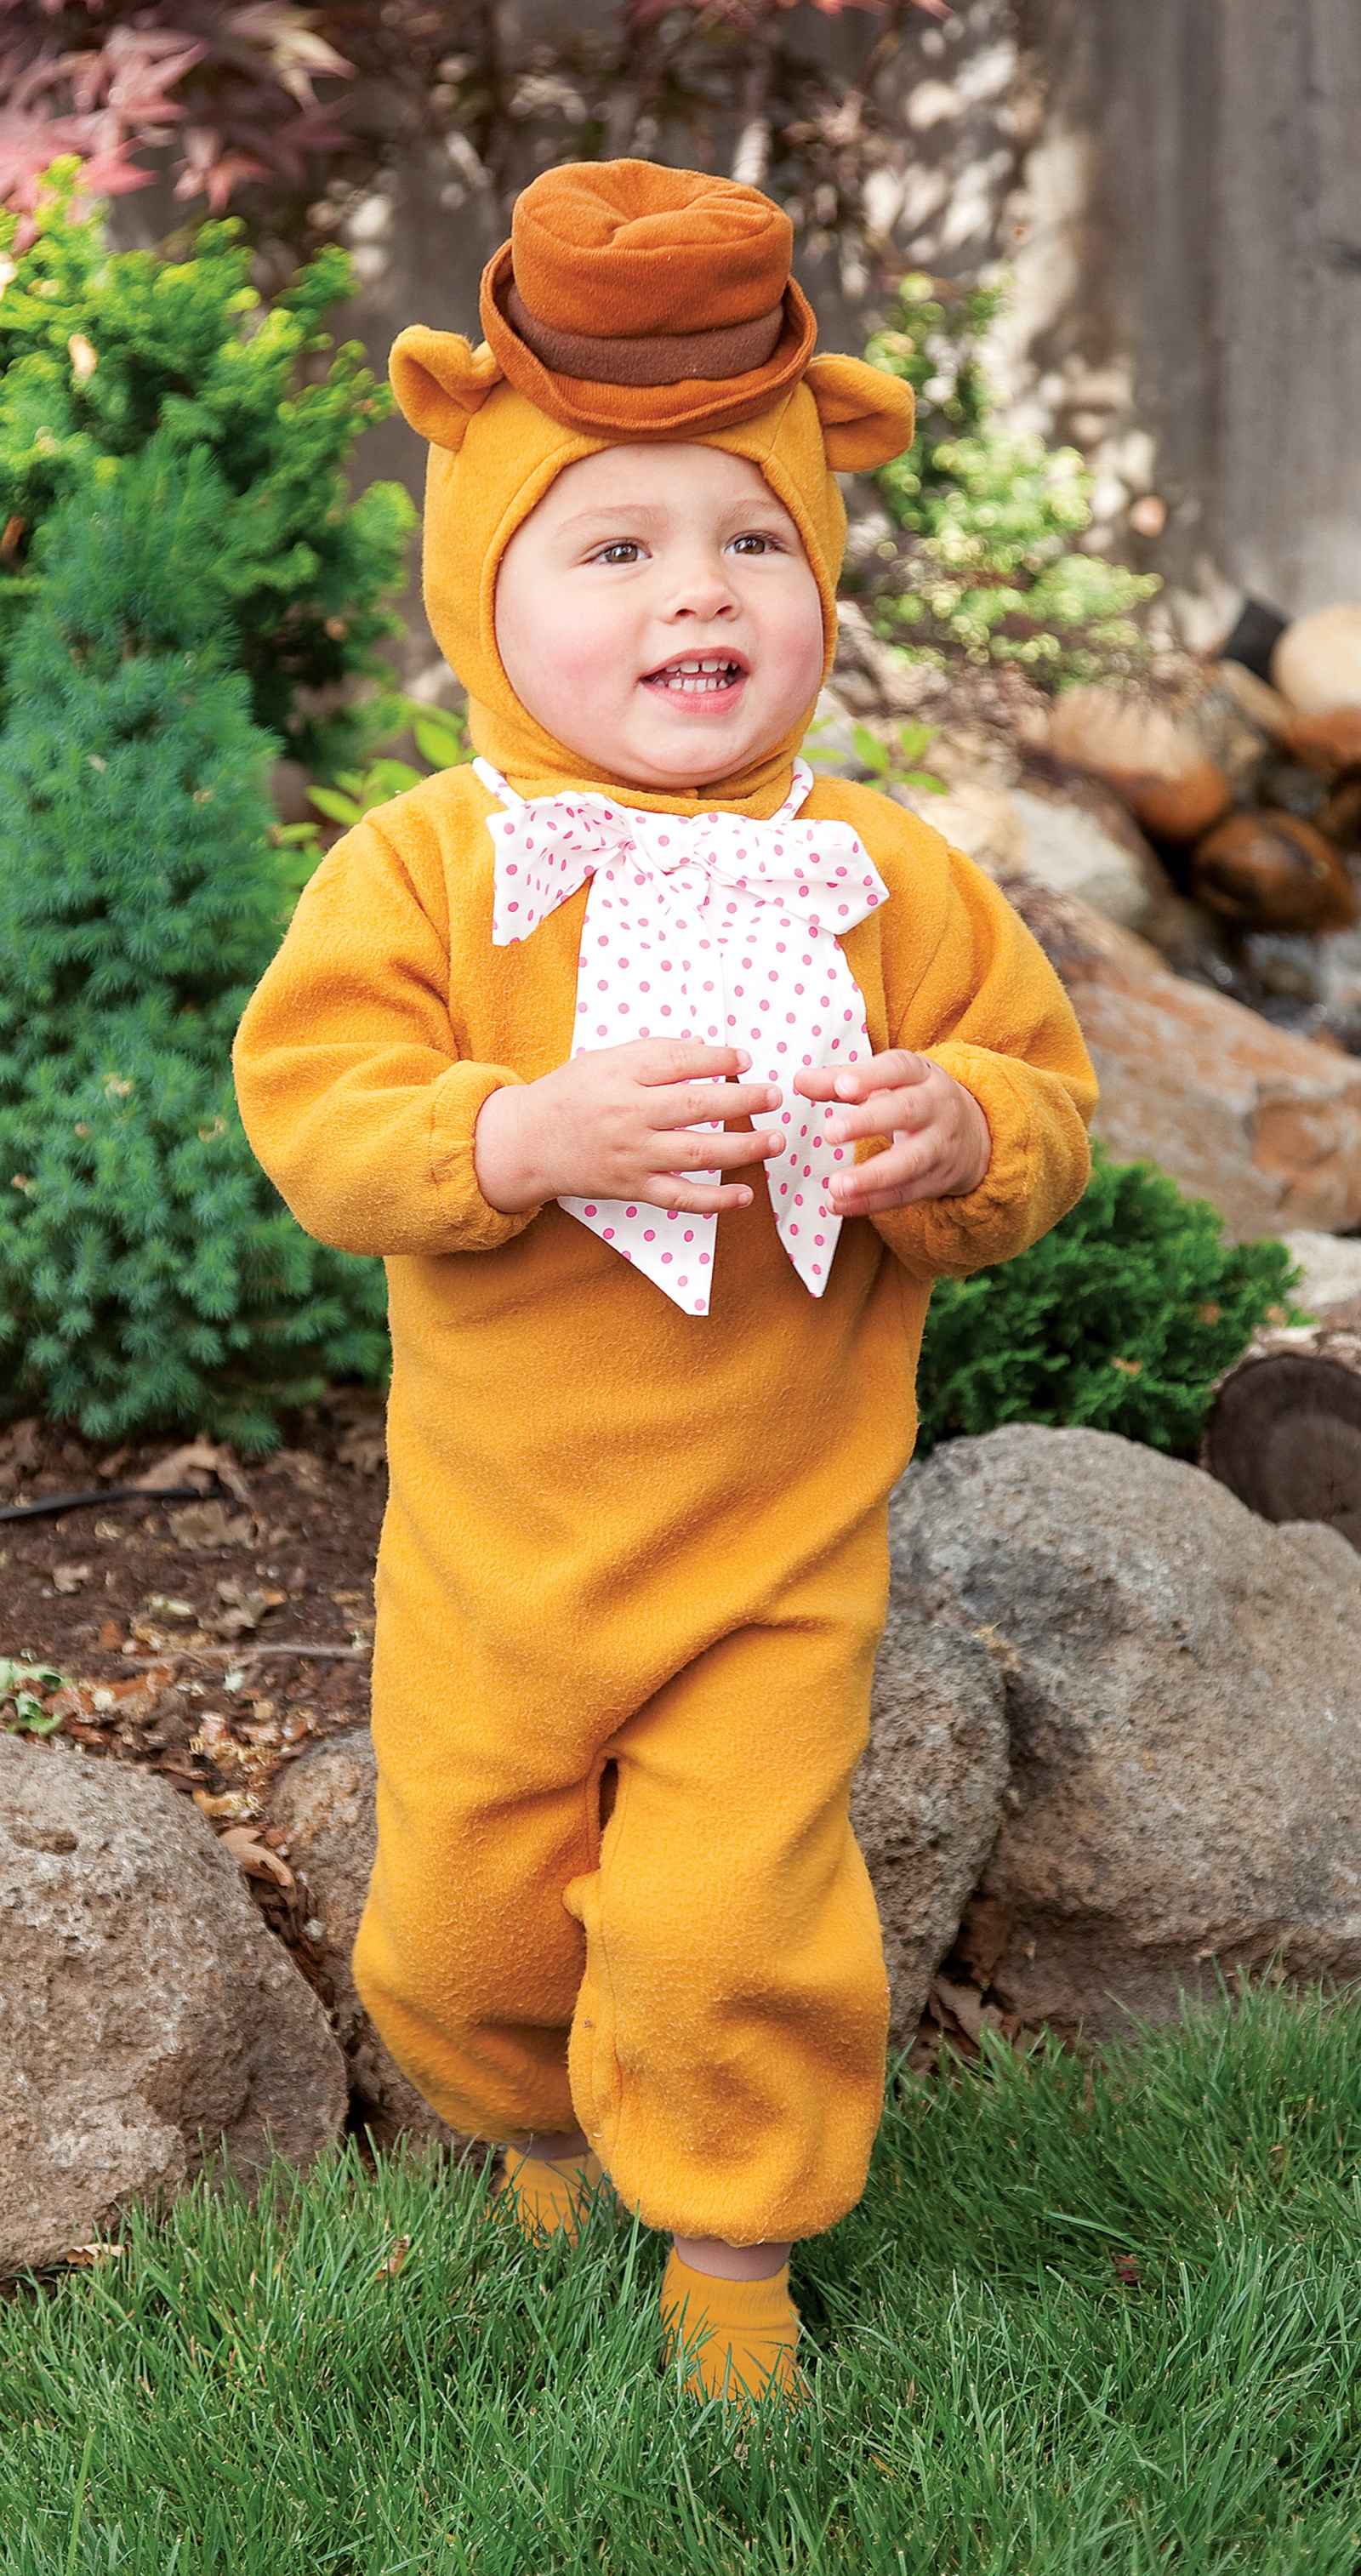 The Muppets - Fozzie Bear Toddler Costume